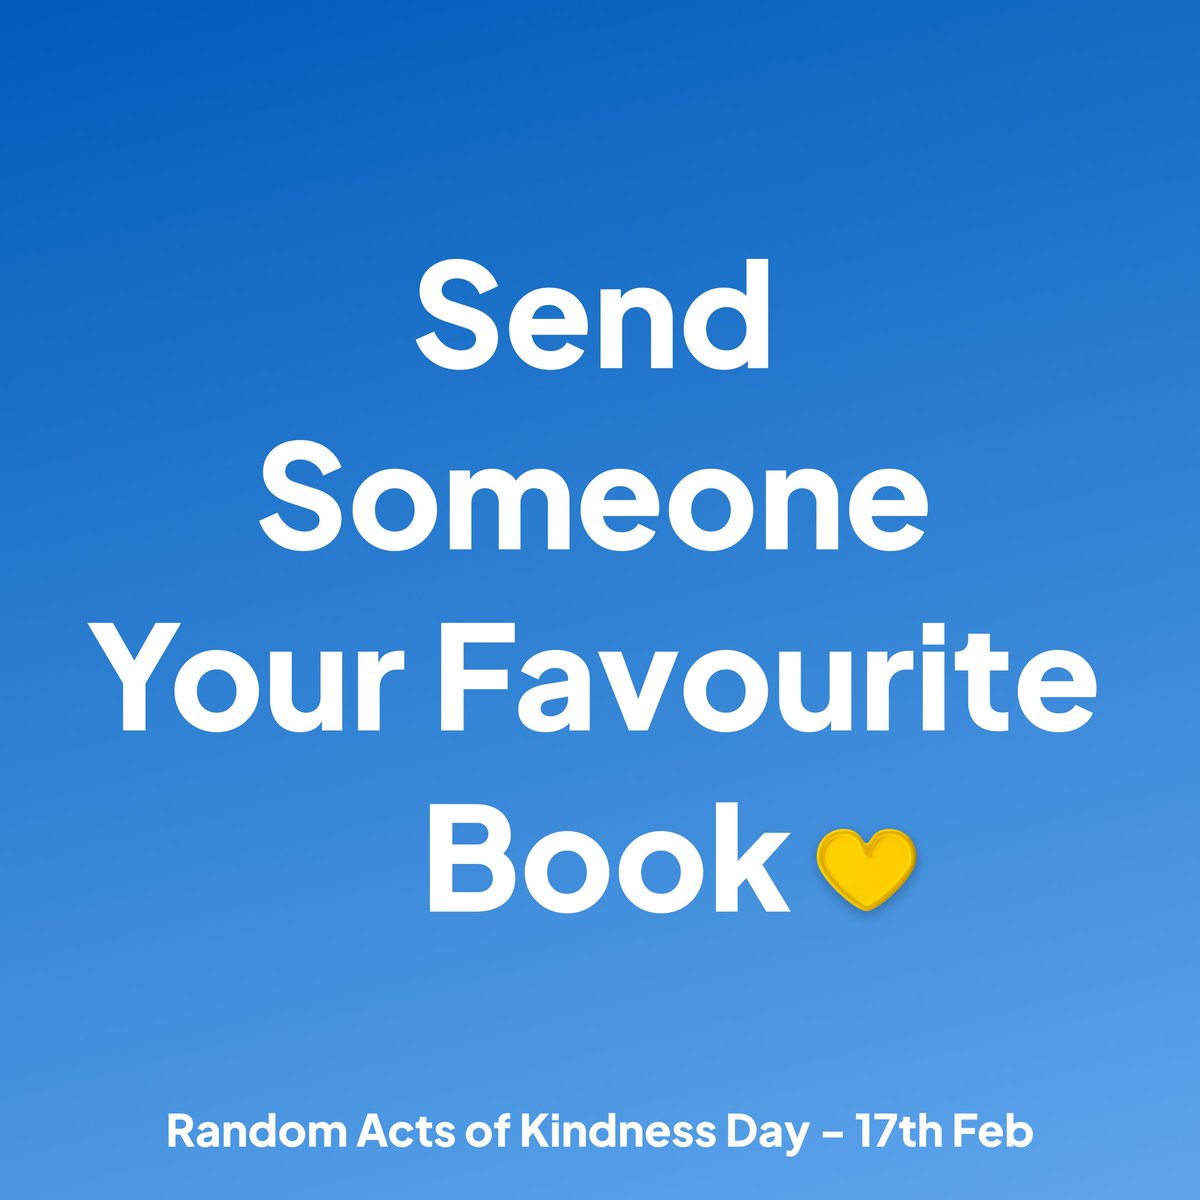 📚✉️ On #RandomActsOfKindnessDay , send someone your favourite book with Parcel2Go. Tag your fellow book worm below📖💙 #LiteraryKindness #ShareABook #MeaningfulConnections #SpreadTheWord